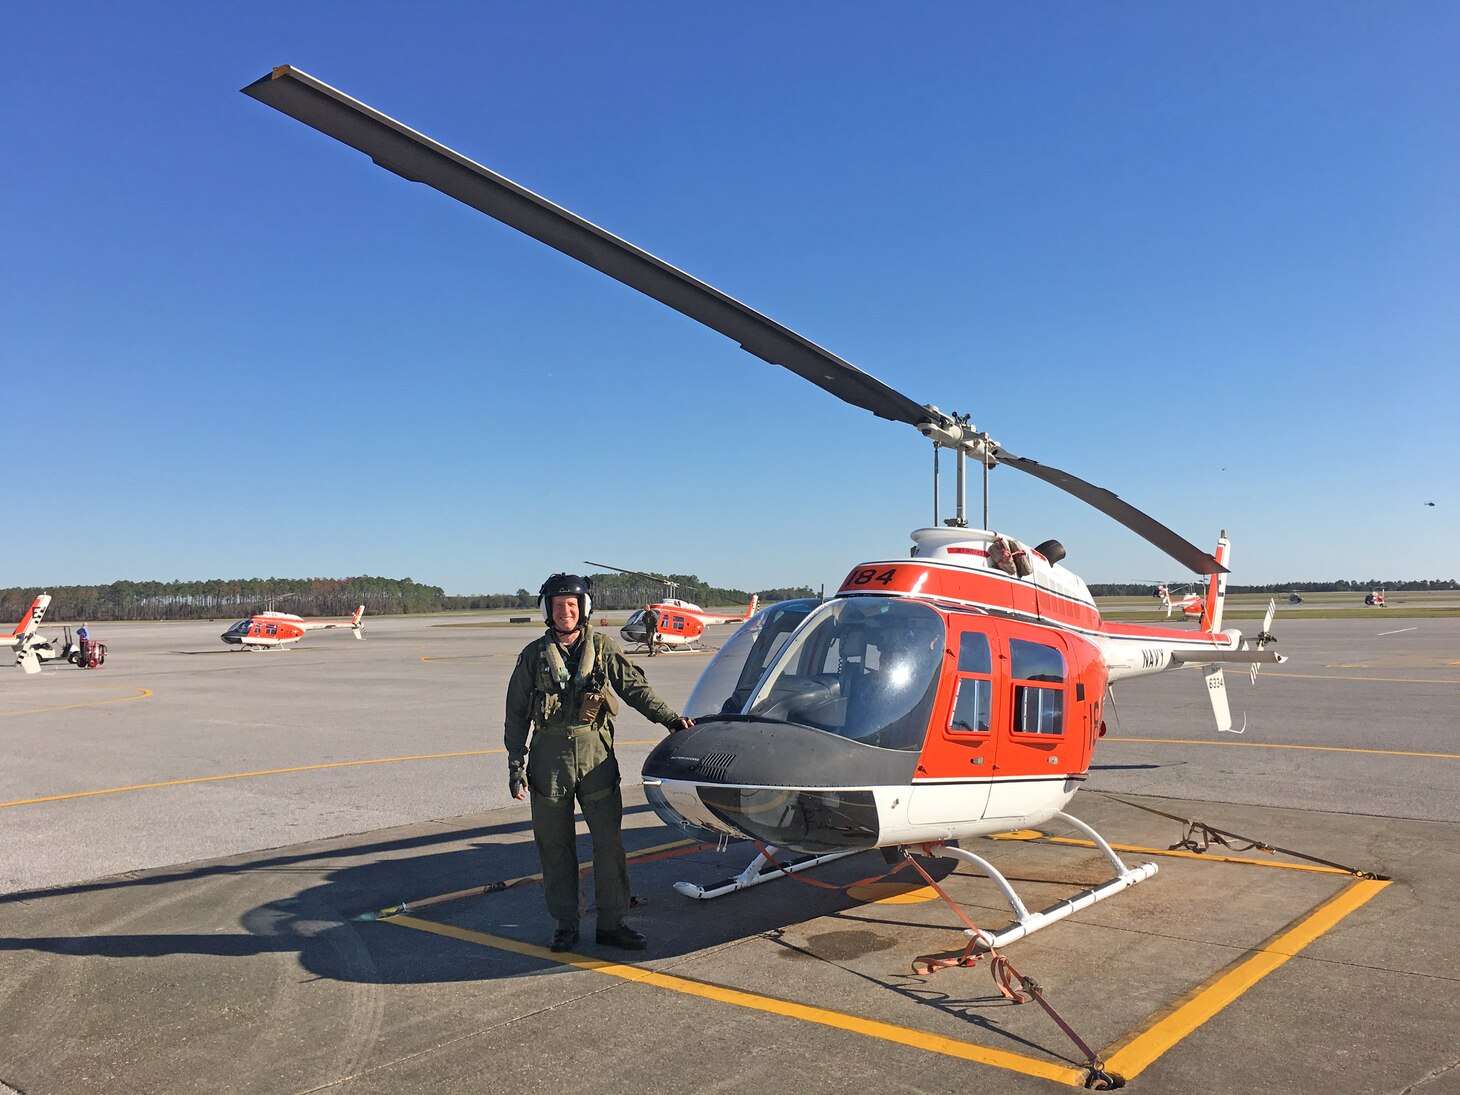 Lt. Cmdr. David Rozovski poses after his visual flight solo in advanced flight training at Naval Air Station Whiting Field, Florida, in February 2017.